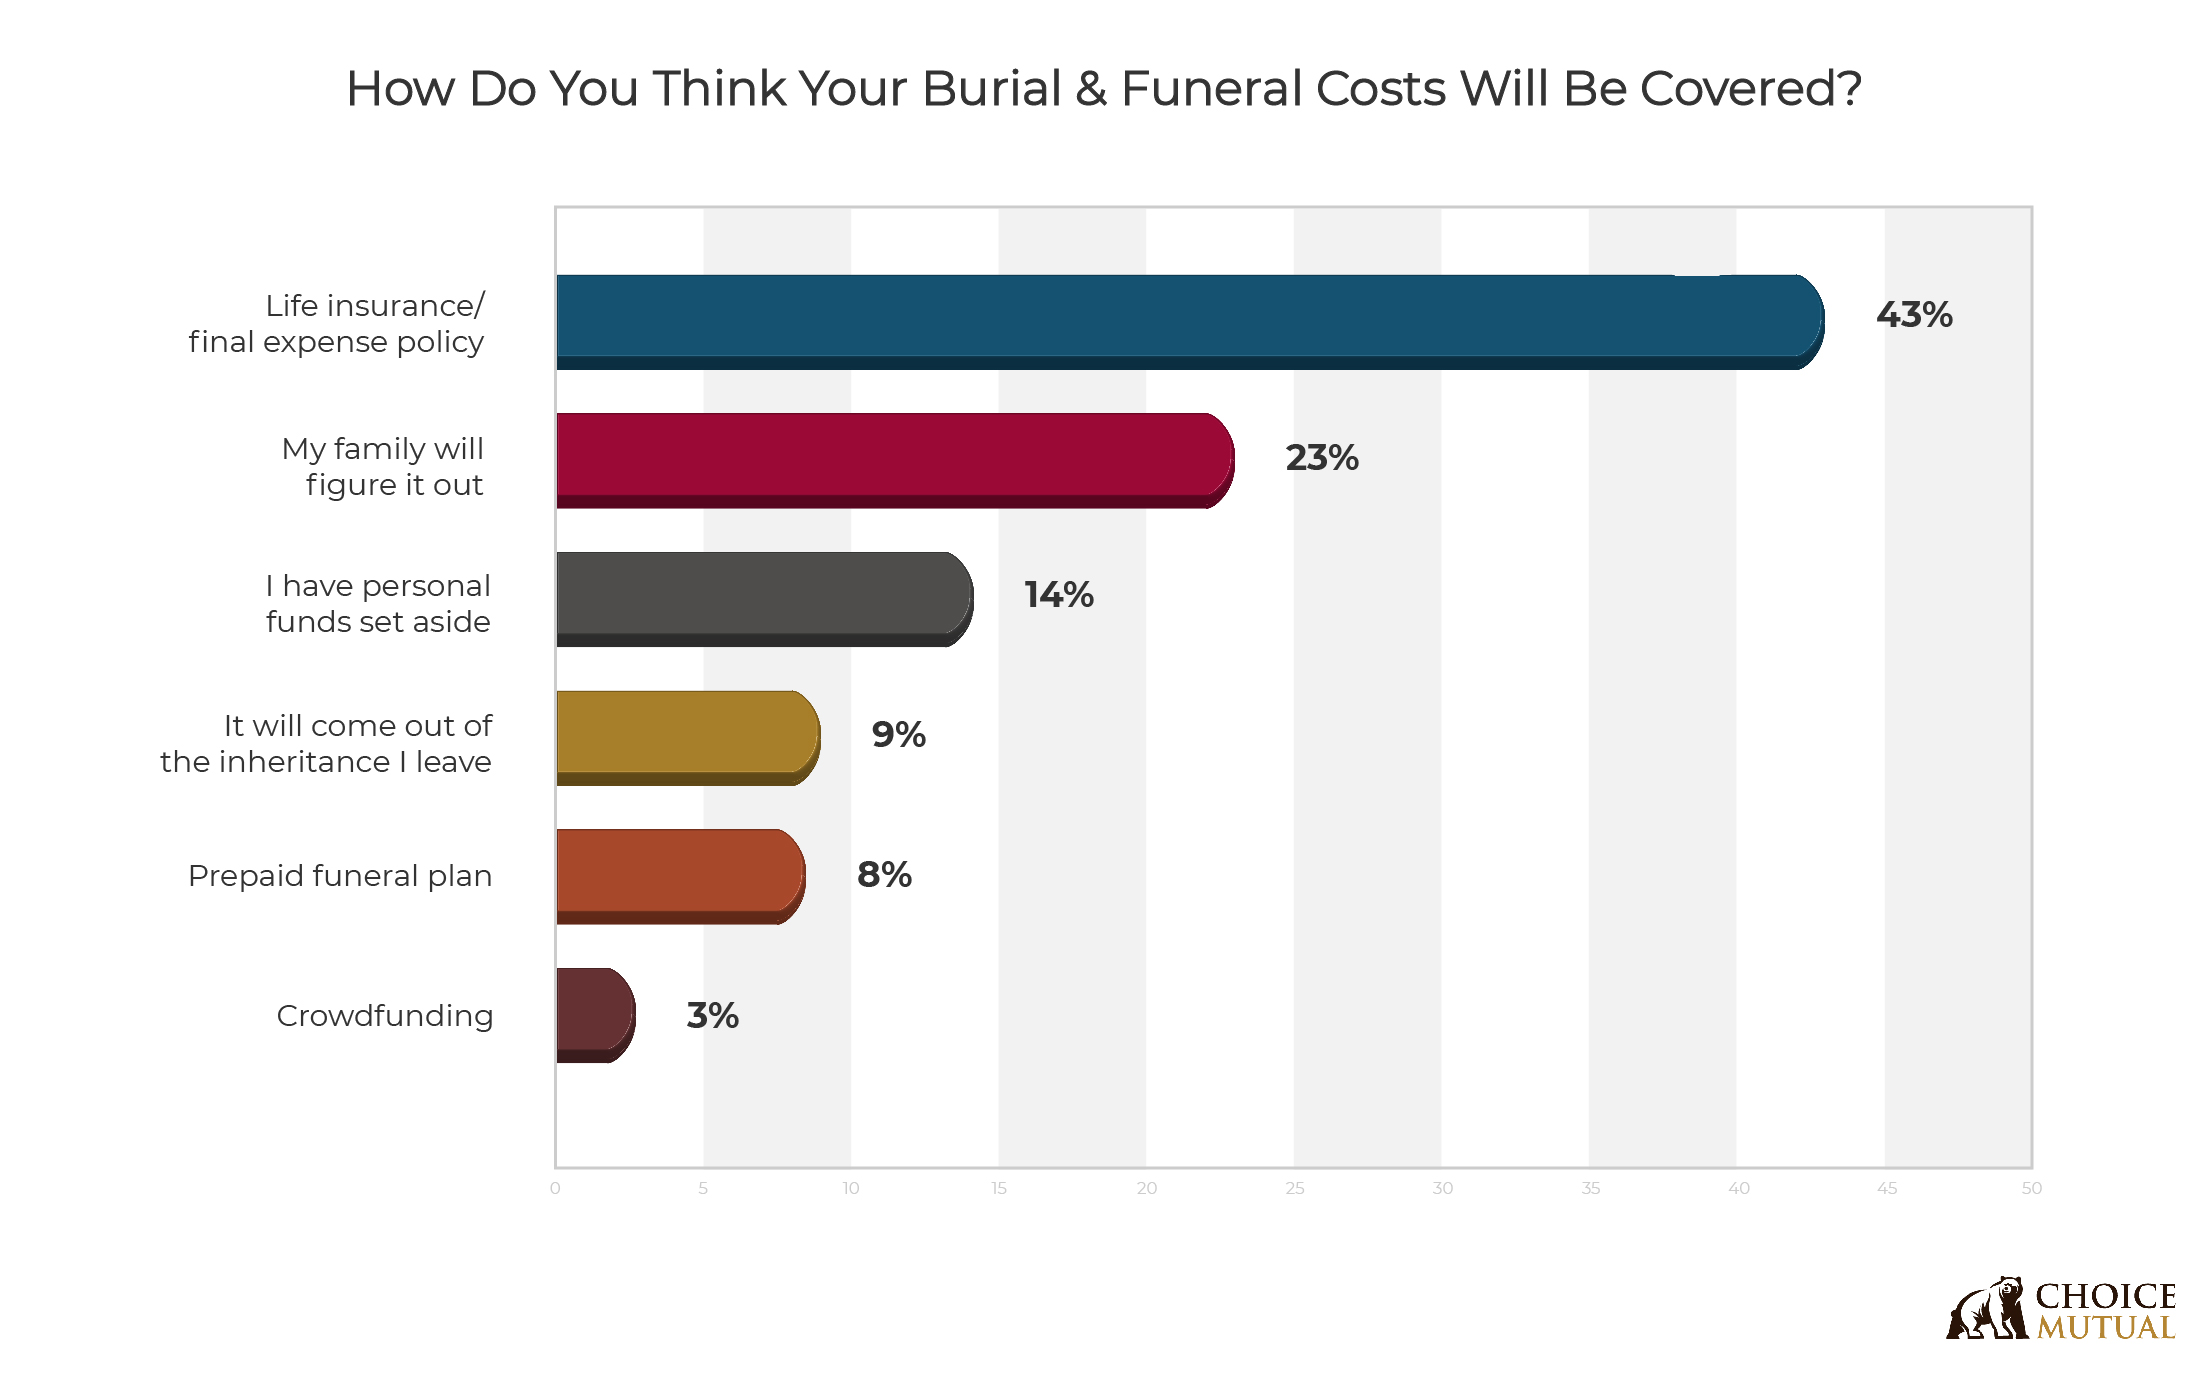 A chart showing how people think their funeral expenses will be paid for.